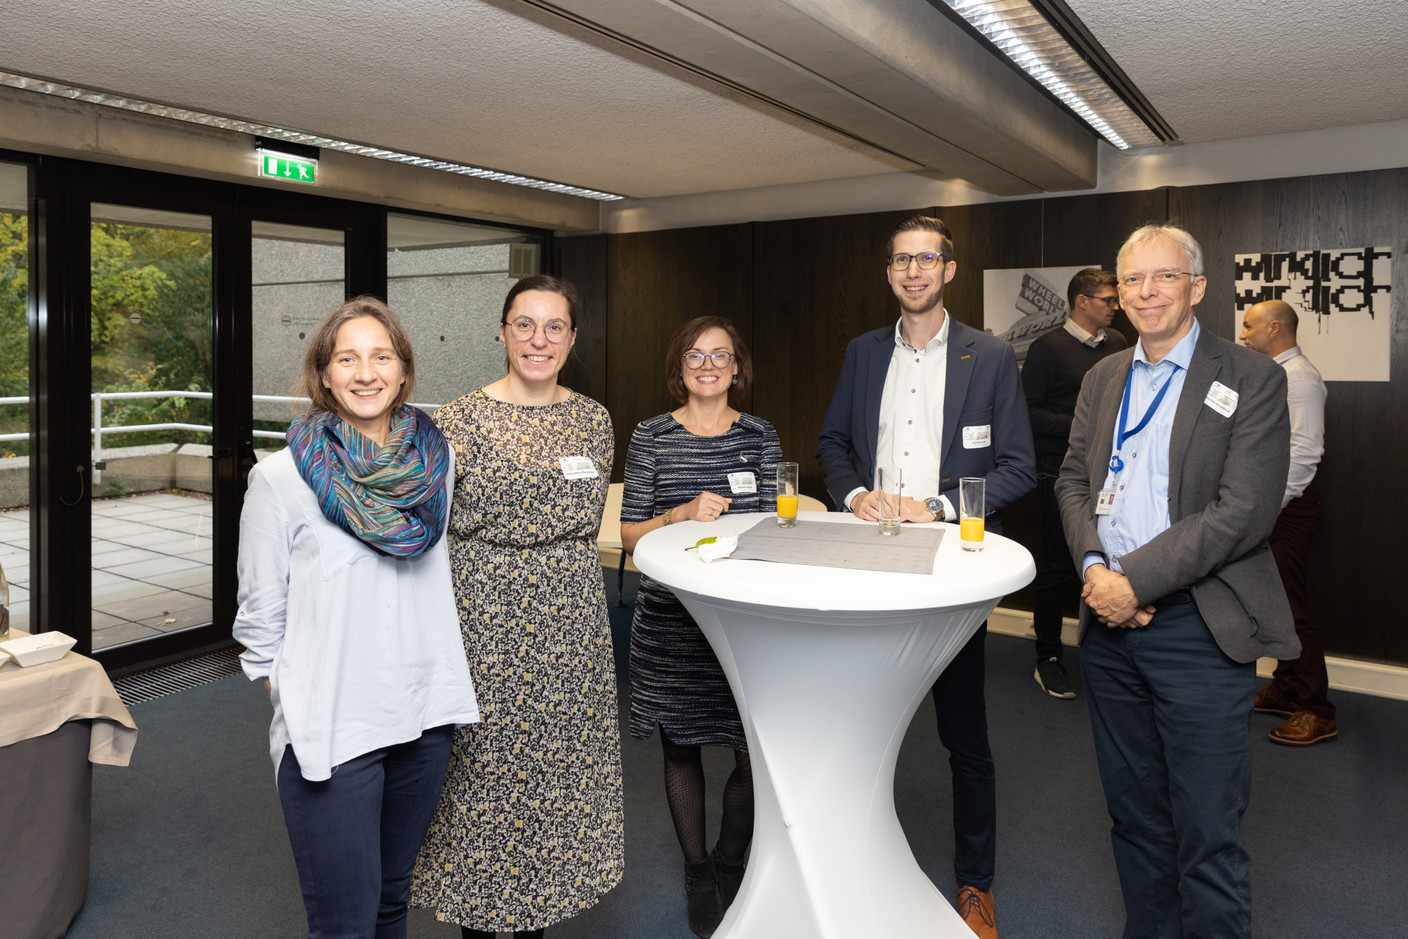 Anne-Marie Reckinger (second from left), Myriam Jacoby (centre) and Pol Henrotte (second from right) during the networking event at the ‘community disaster preparedness’ conference at EIB headquarters in Luxembourg on 26 October 2023. Photo: Romain Gamba / Maison Moderne